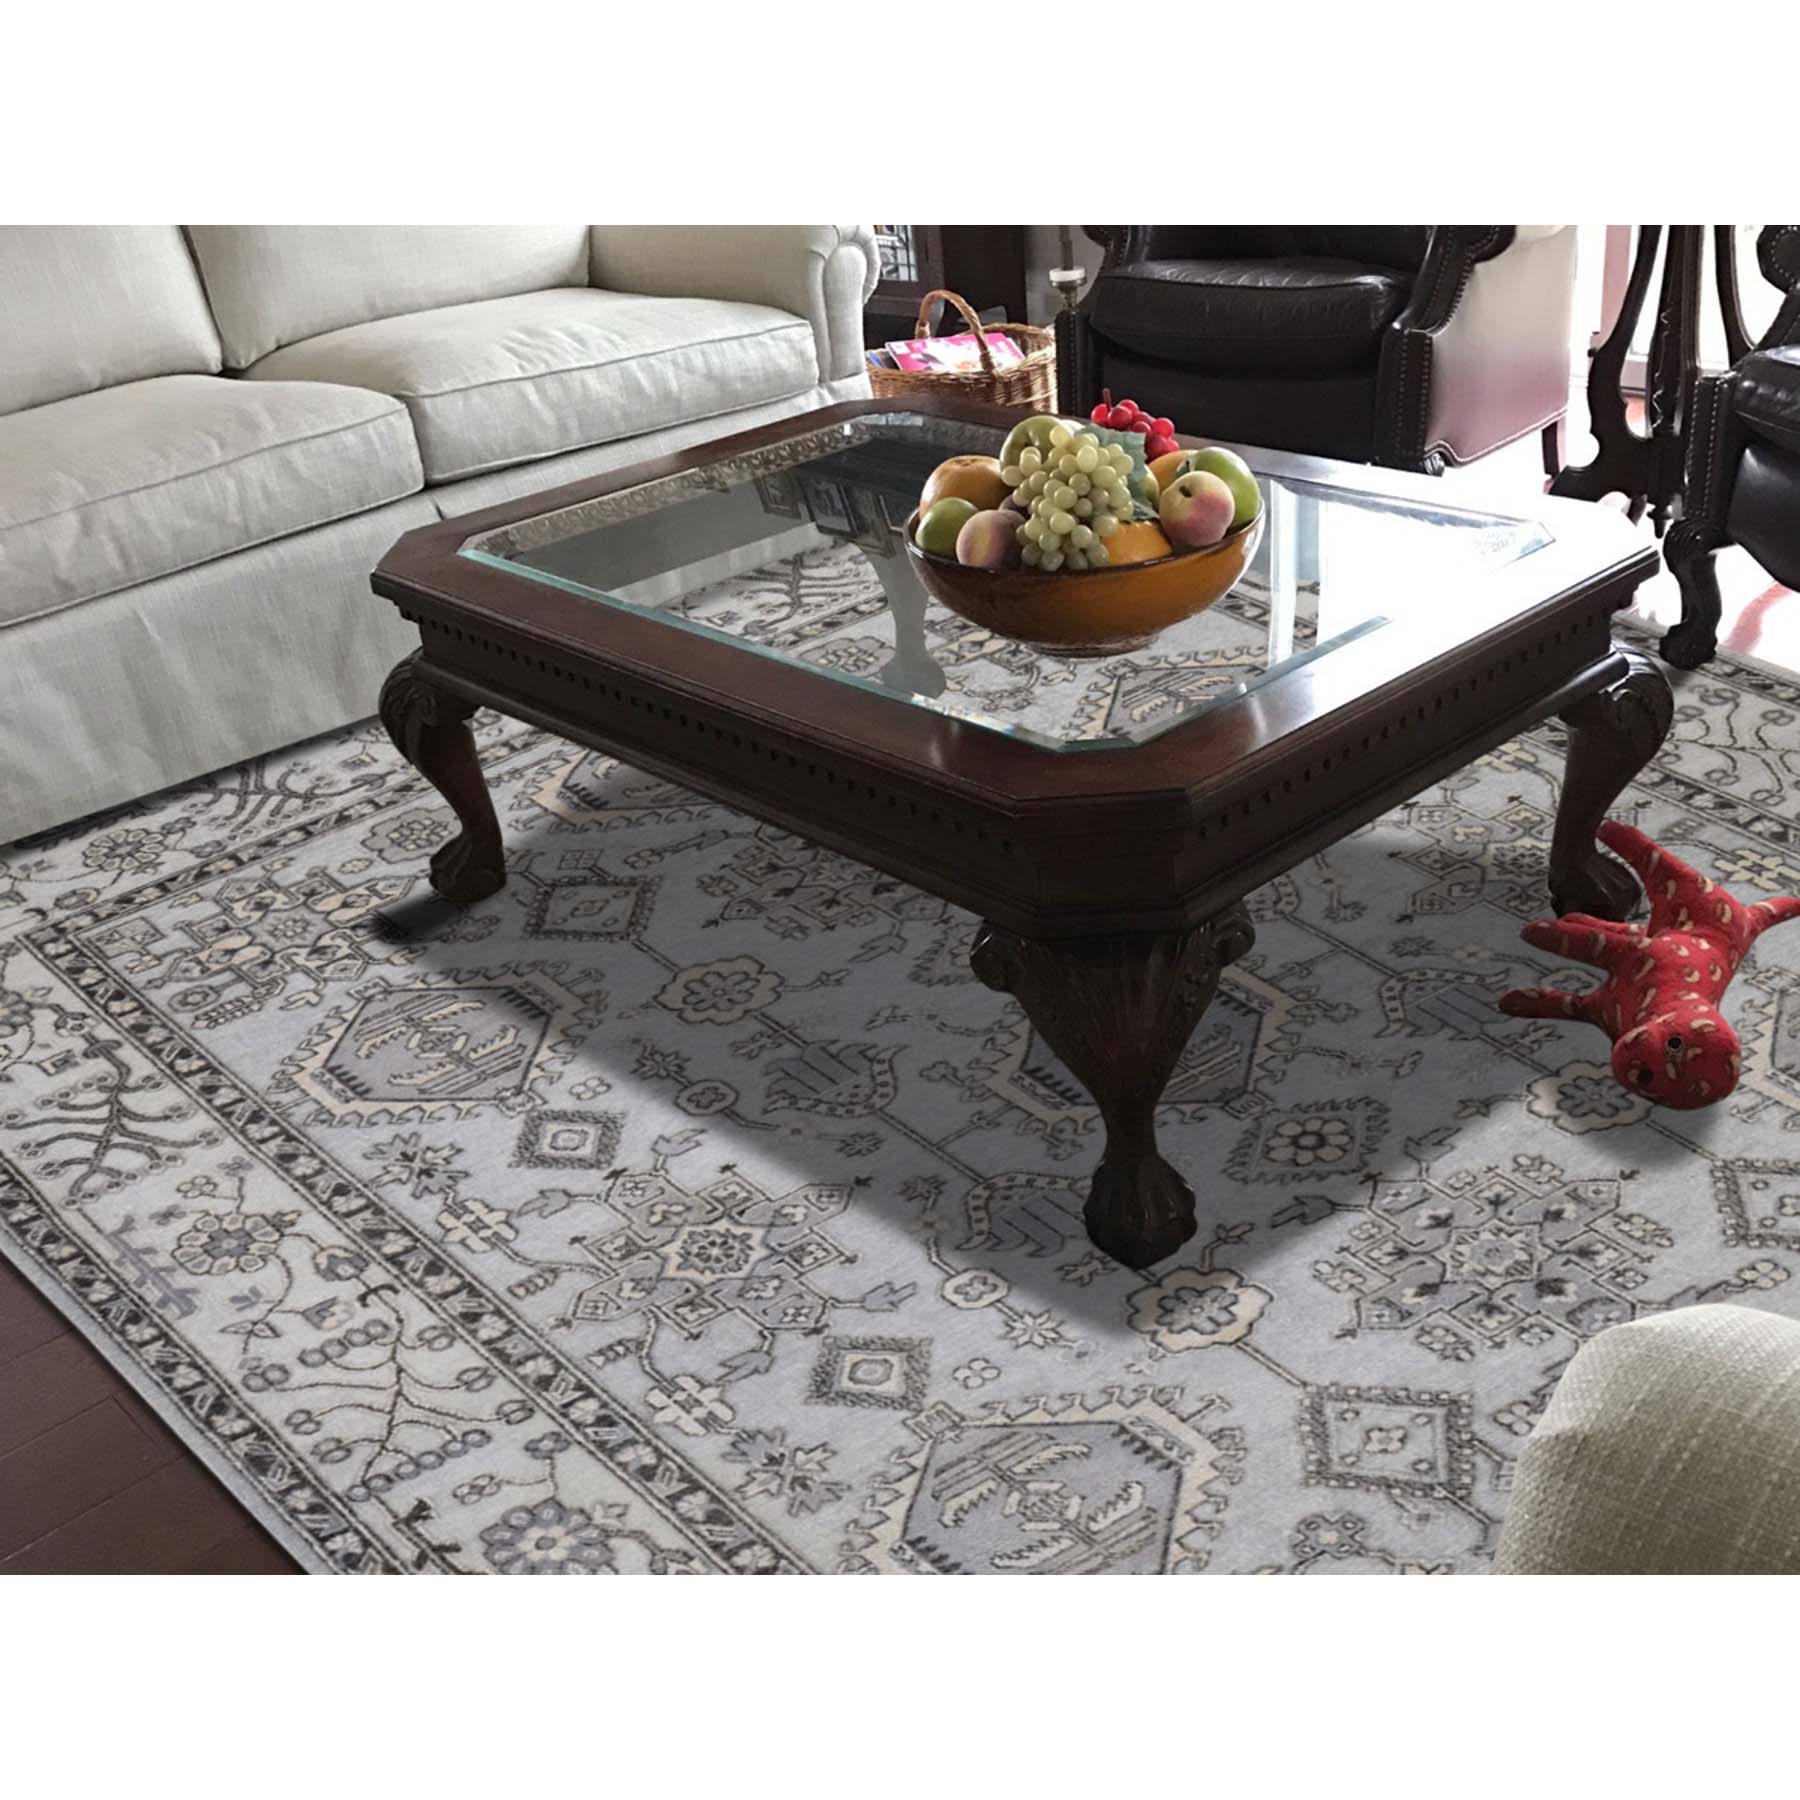 8-x9-10  Textured Pile With Textured Wool Hi-Low Peshawar Hand-Knotted Oriental Rug 